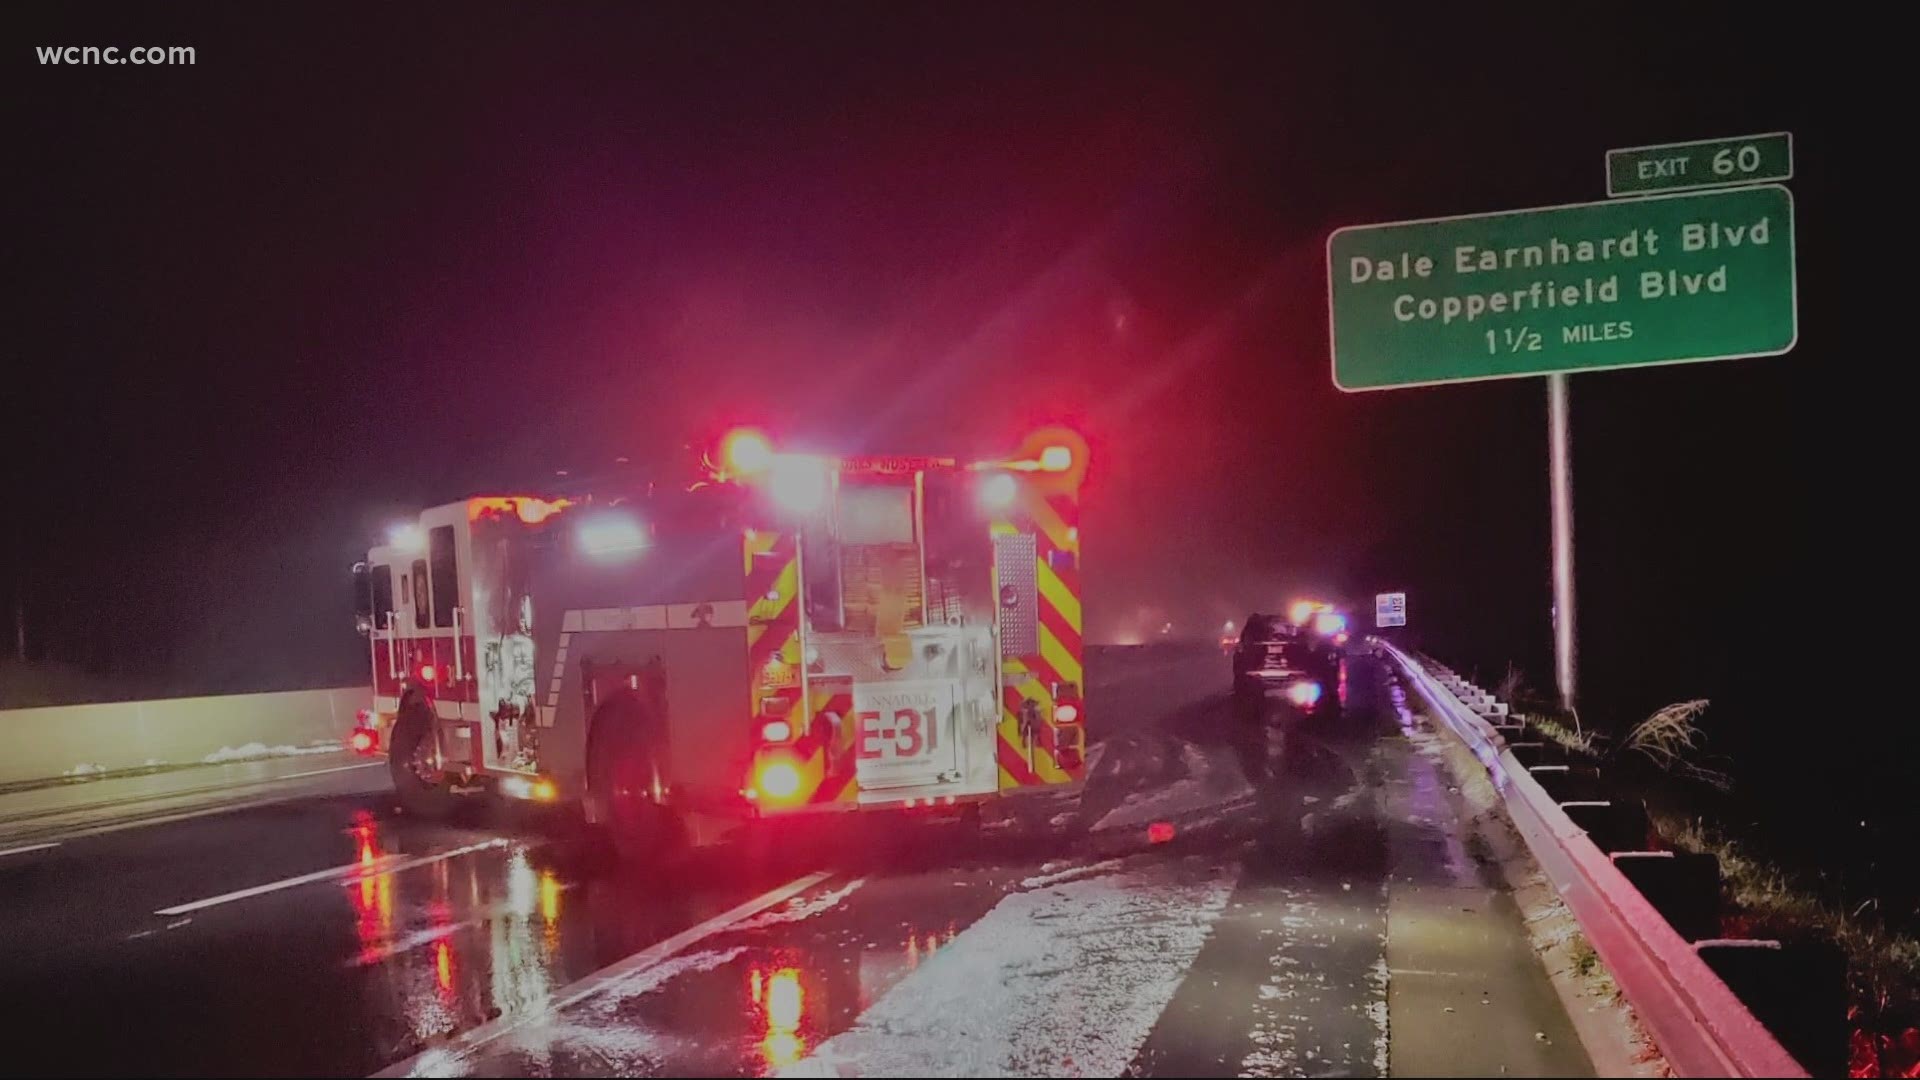 The fire department said their crews were helping victims in the winter weather when their firefighters were nearly injured by a drunk driver.